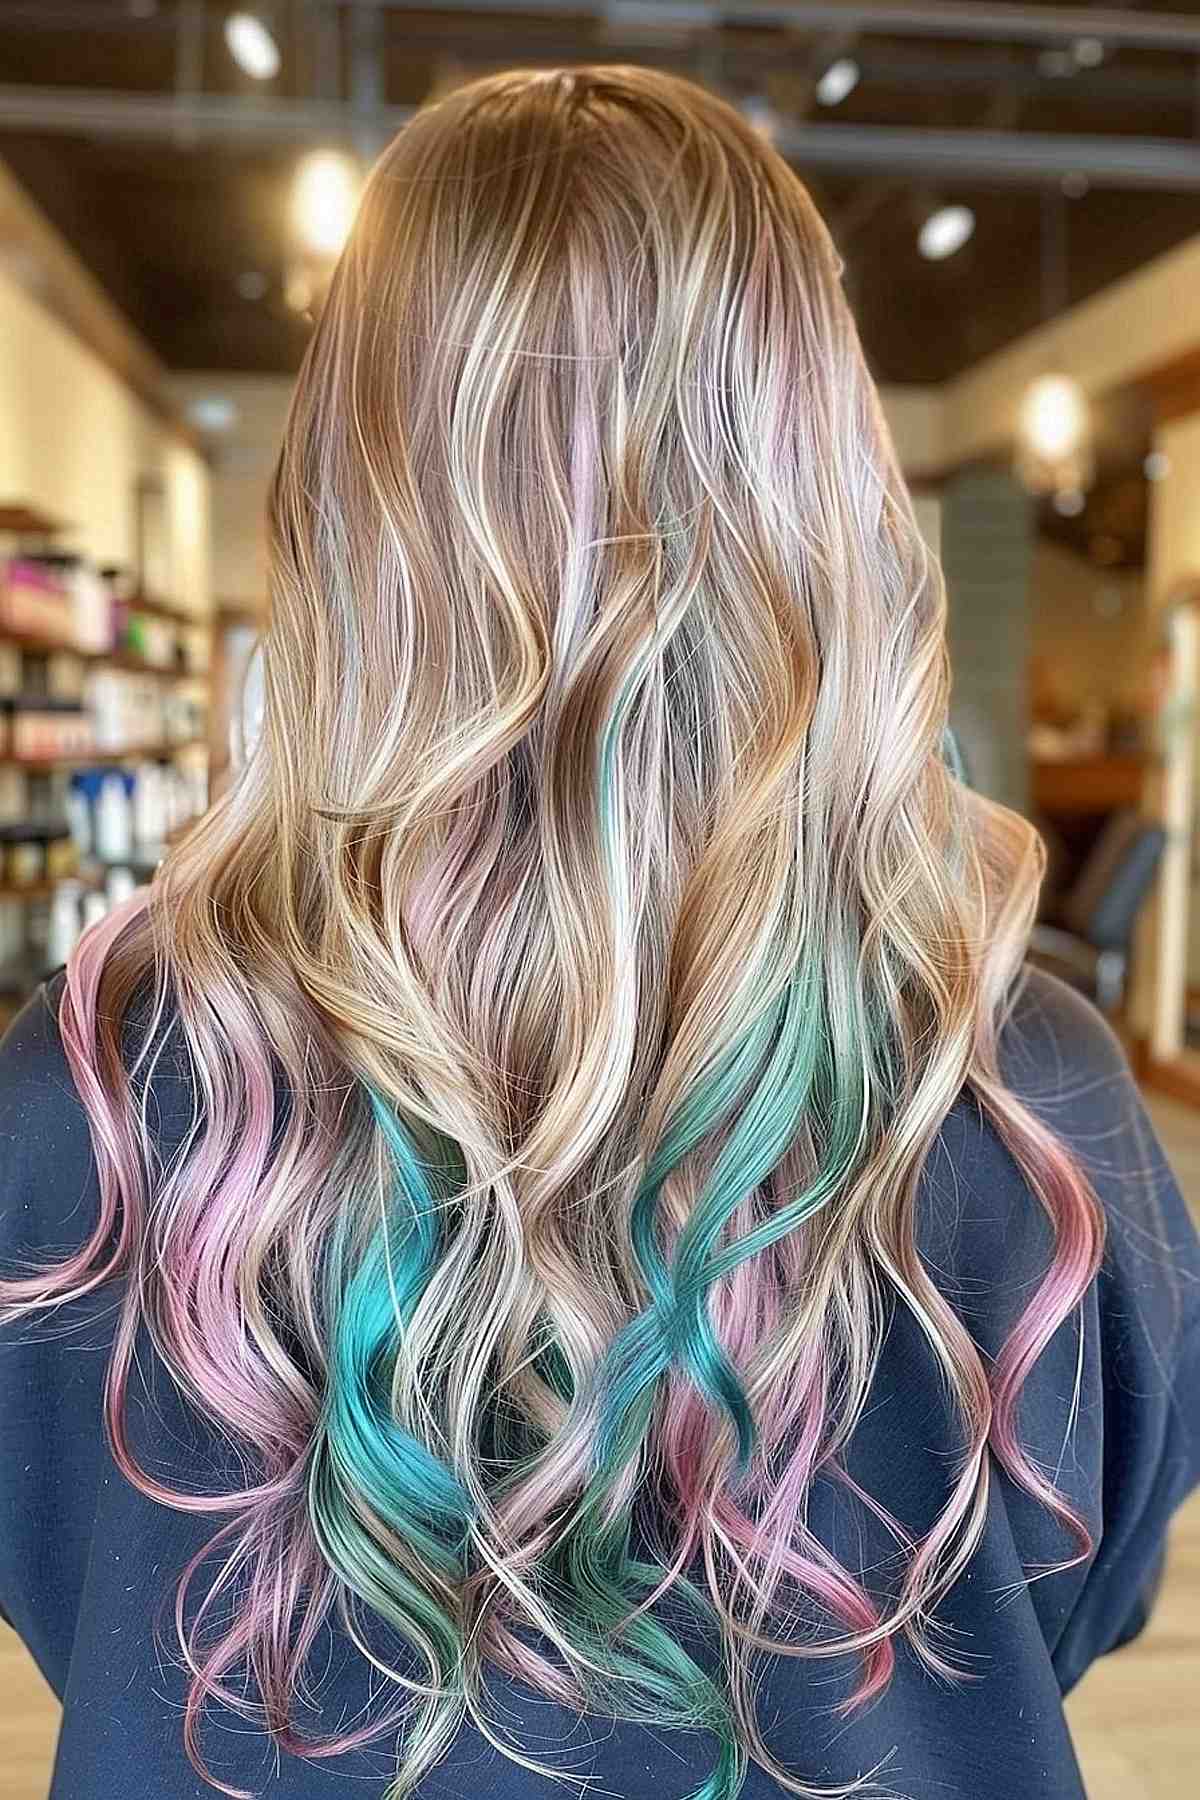 A woman with long, wavy blonde hair featuring subtle peekaboo highlights in soft pastel pink and green, adding a playful touch to her look.